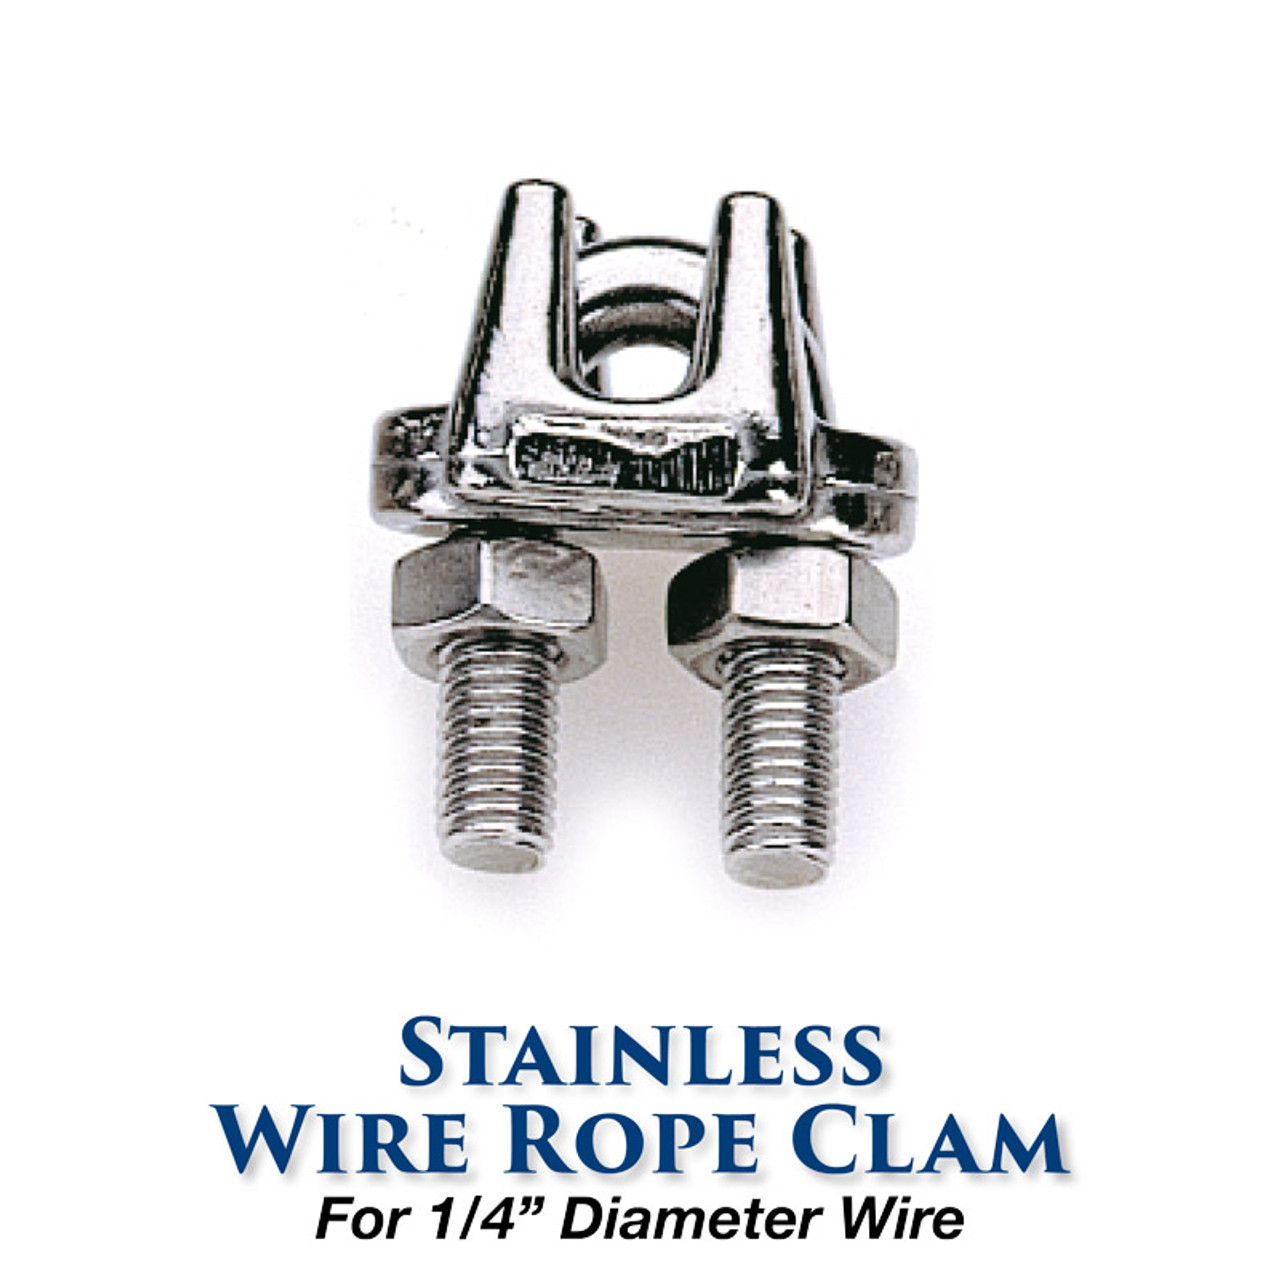 Edson Marine Steering Hardware: Stainless Wire Rope Clamp - 1/4